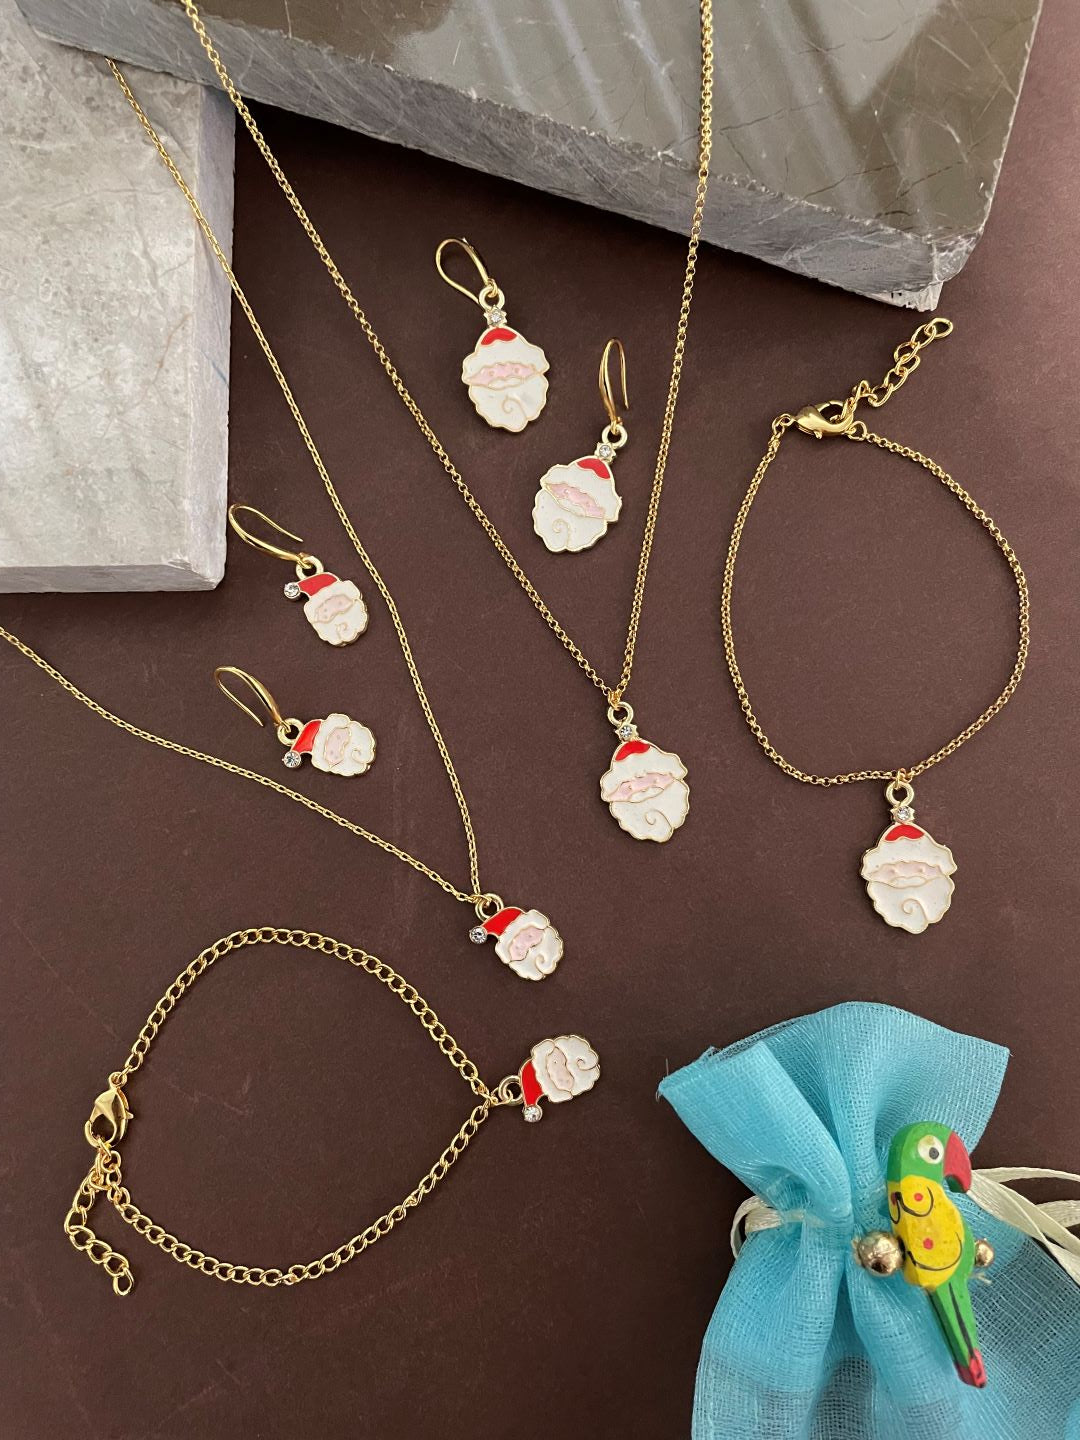 Christmas White & Red Santa Claus Pendant Necklace Earring and Bracelet Set